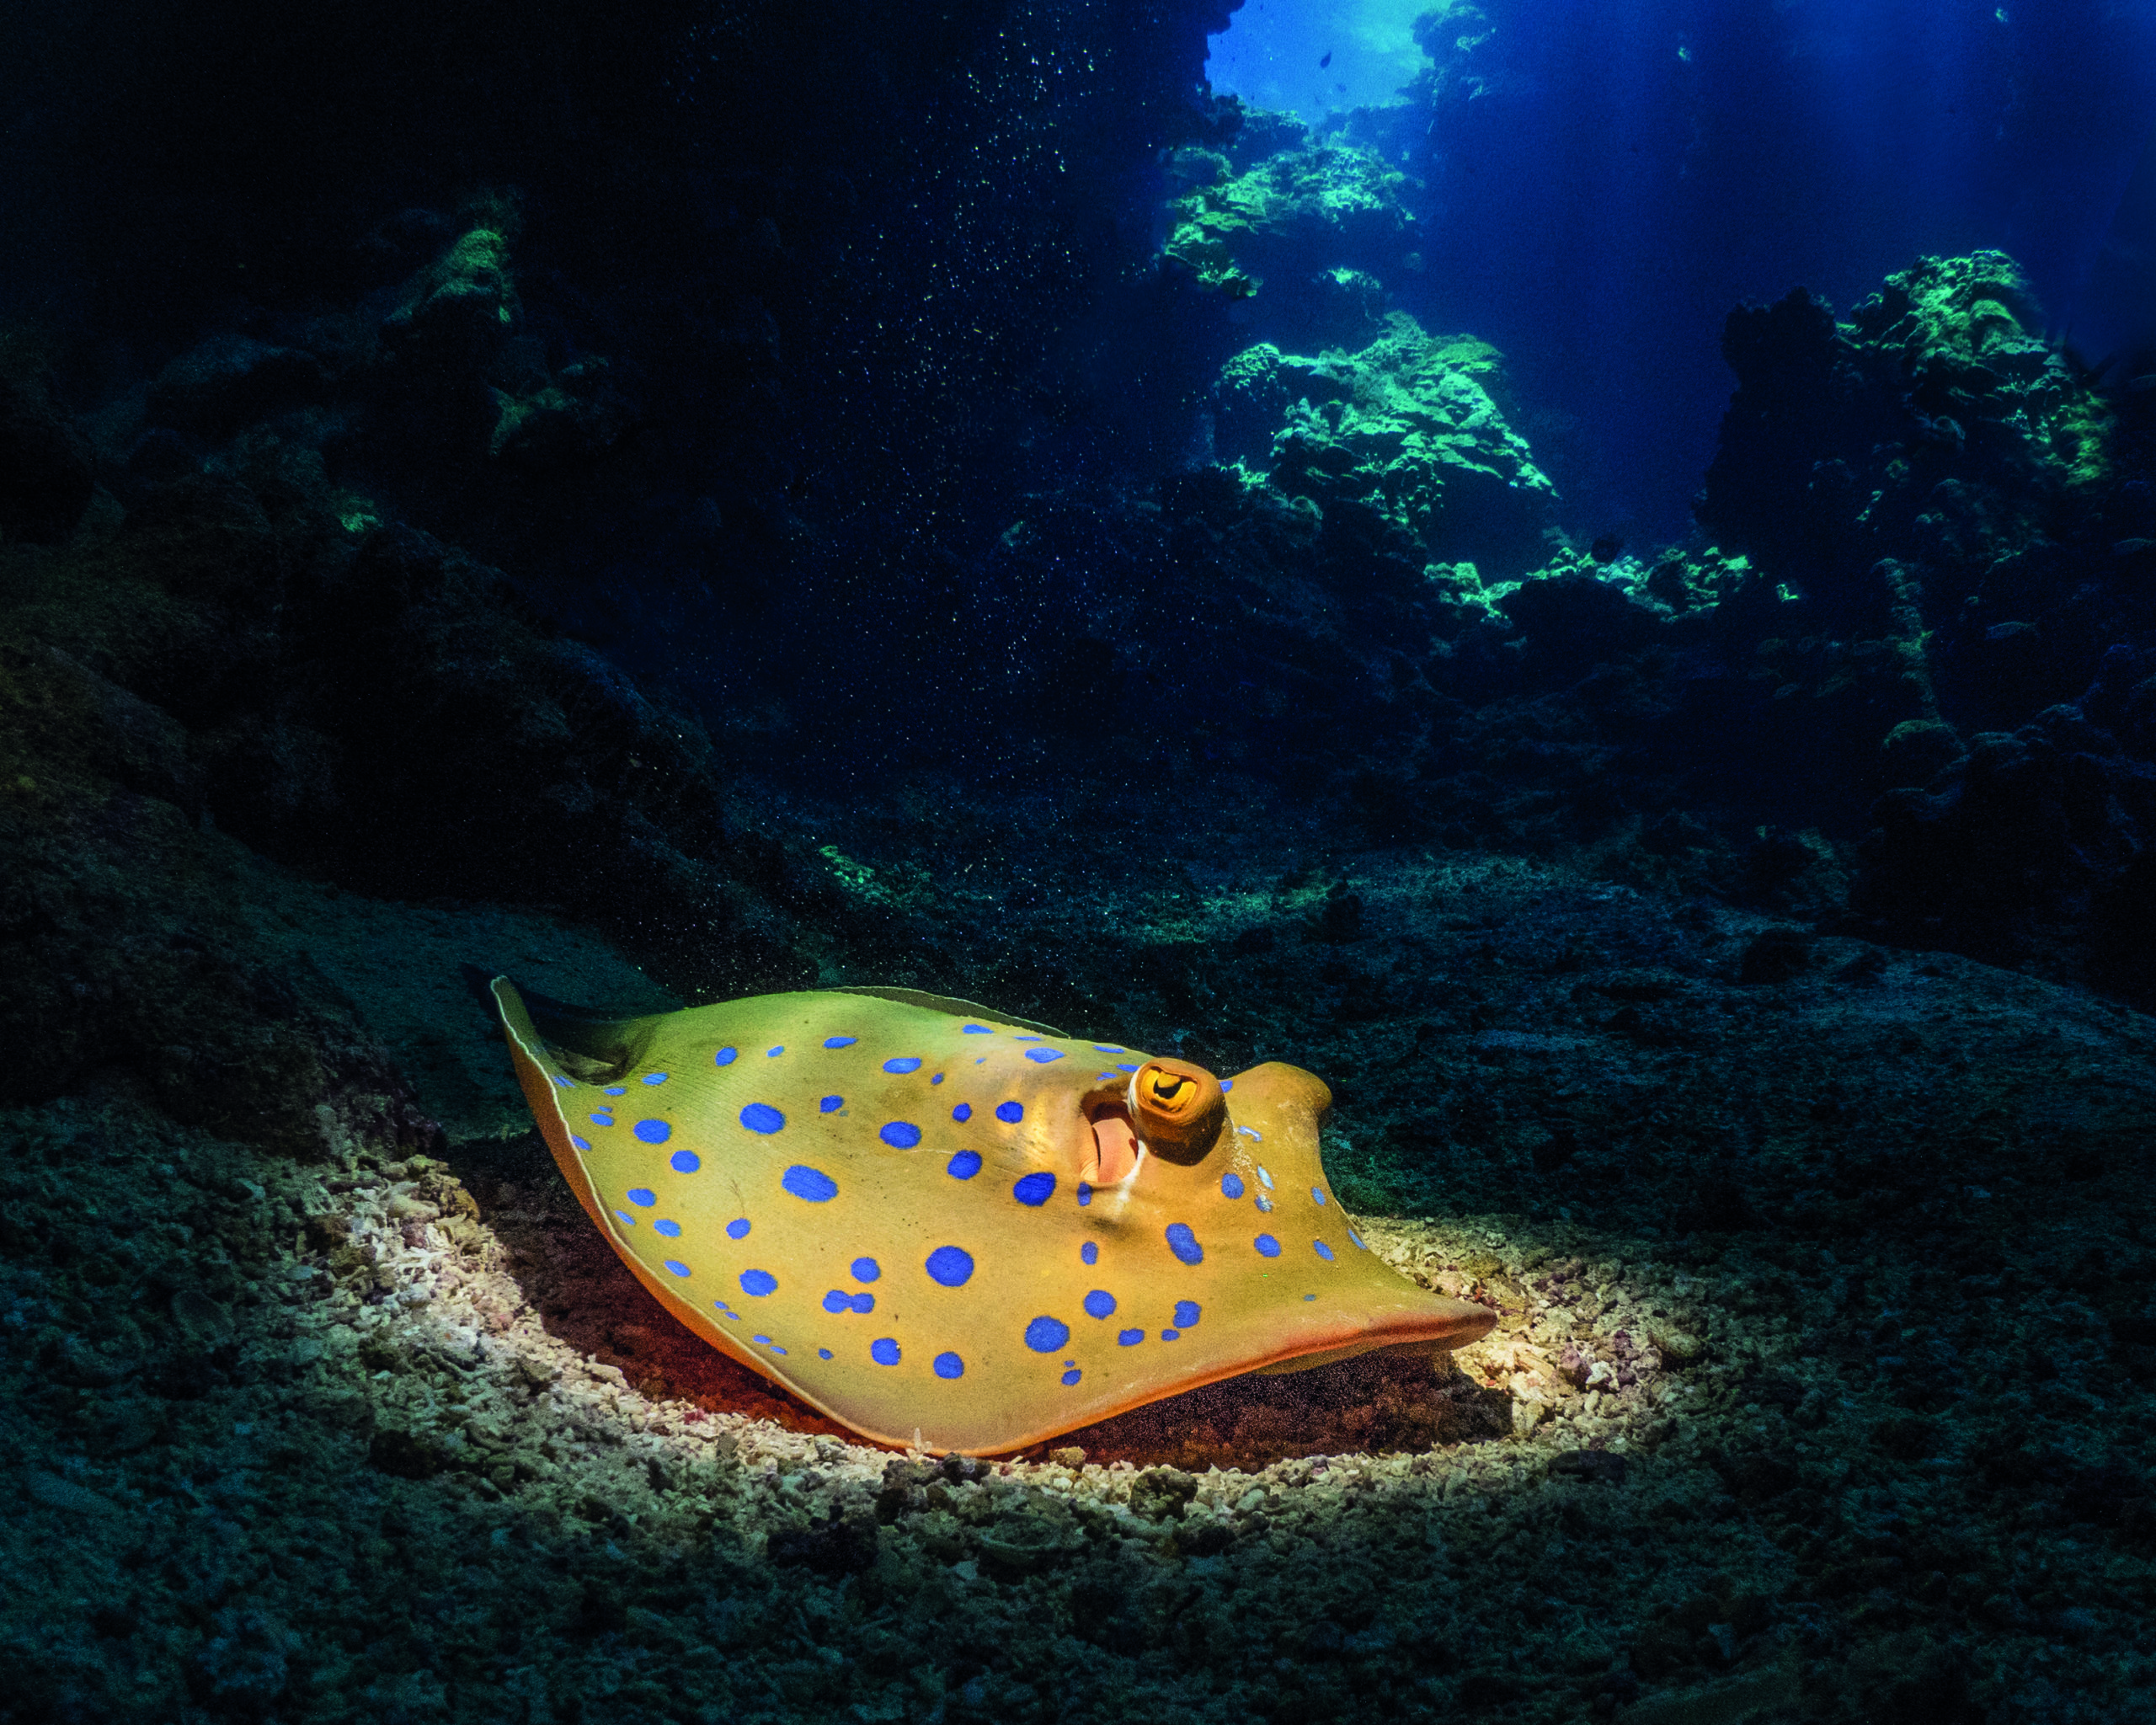 A blue spotted stingray inside the cave system of Sha’ab Claudia in the Southern red Sea. The general exposure is set on the background where the opening of the cave gives a sense of depth. By using a snoot on my strobe I concentrate the light on the stingray.